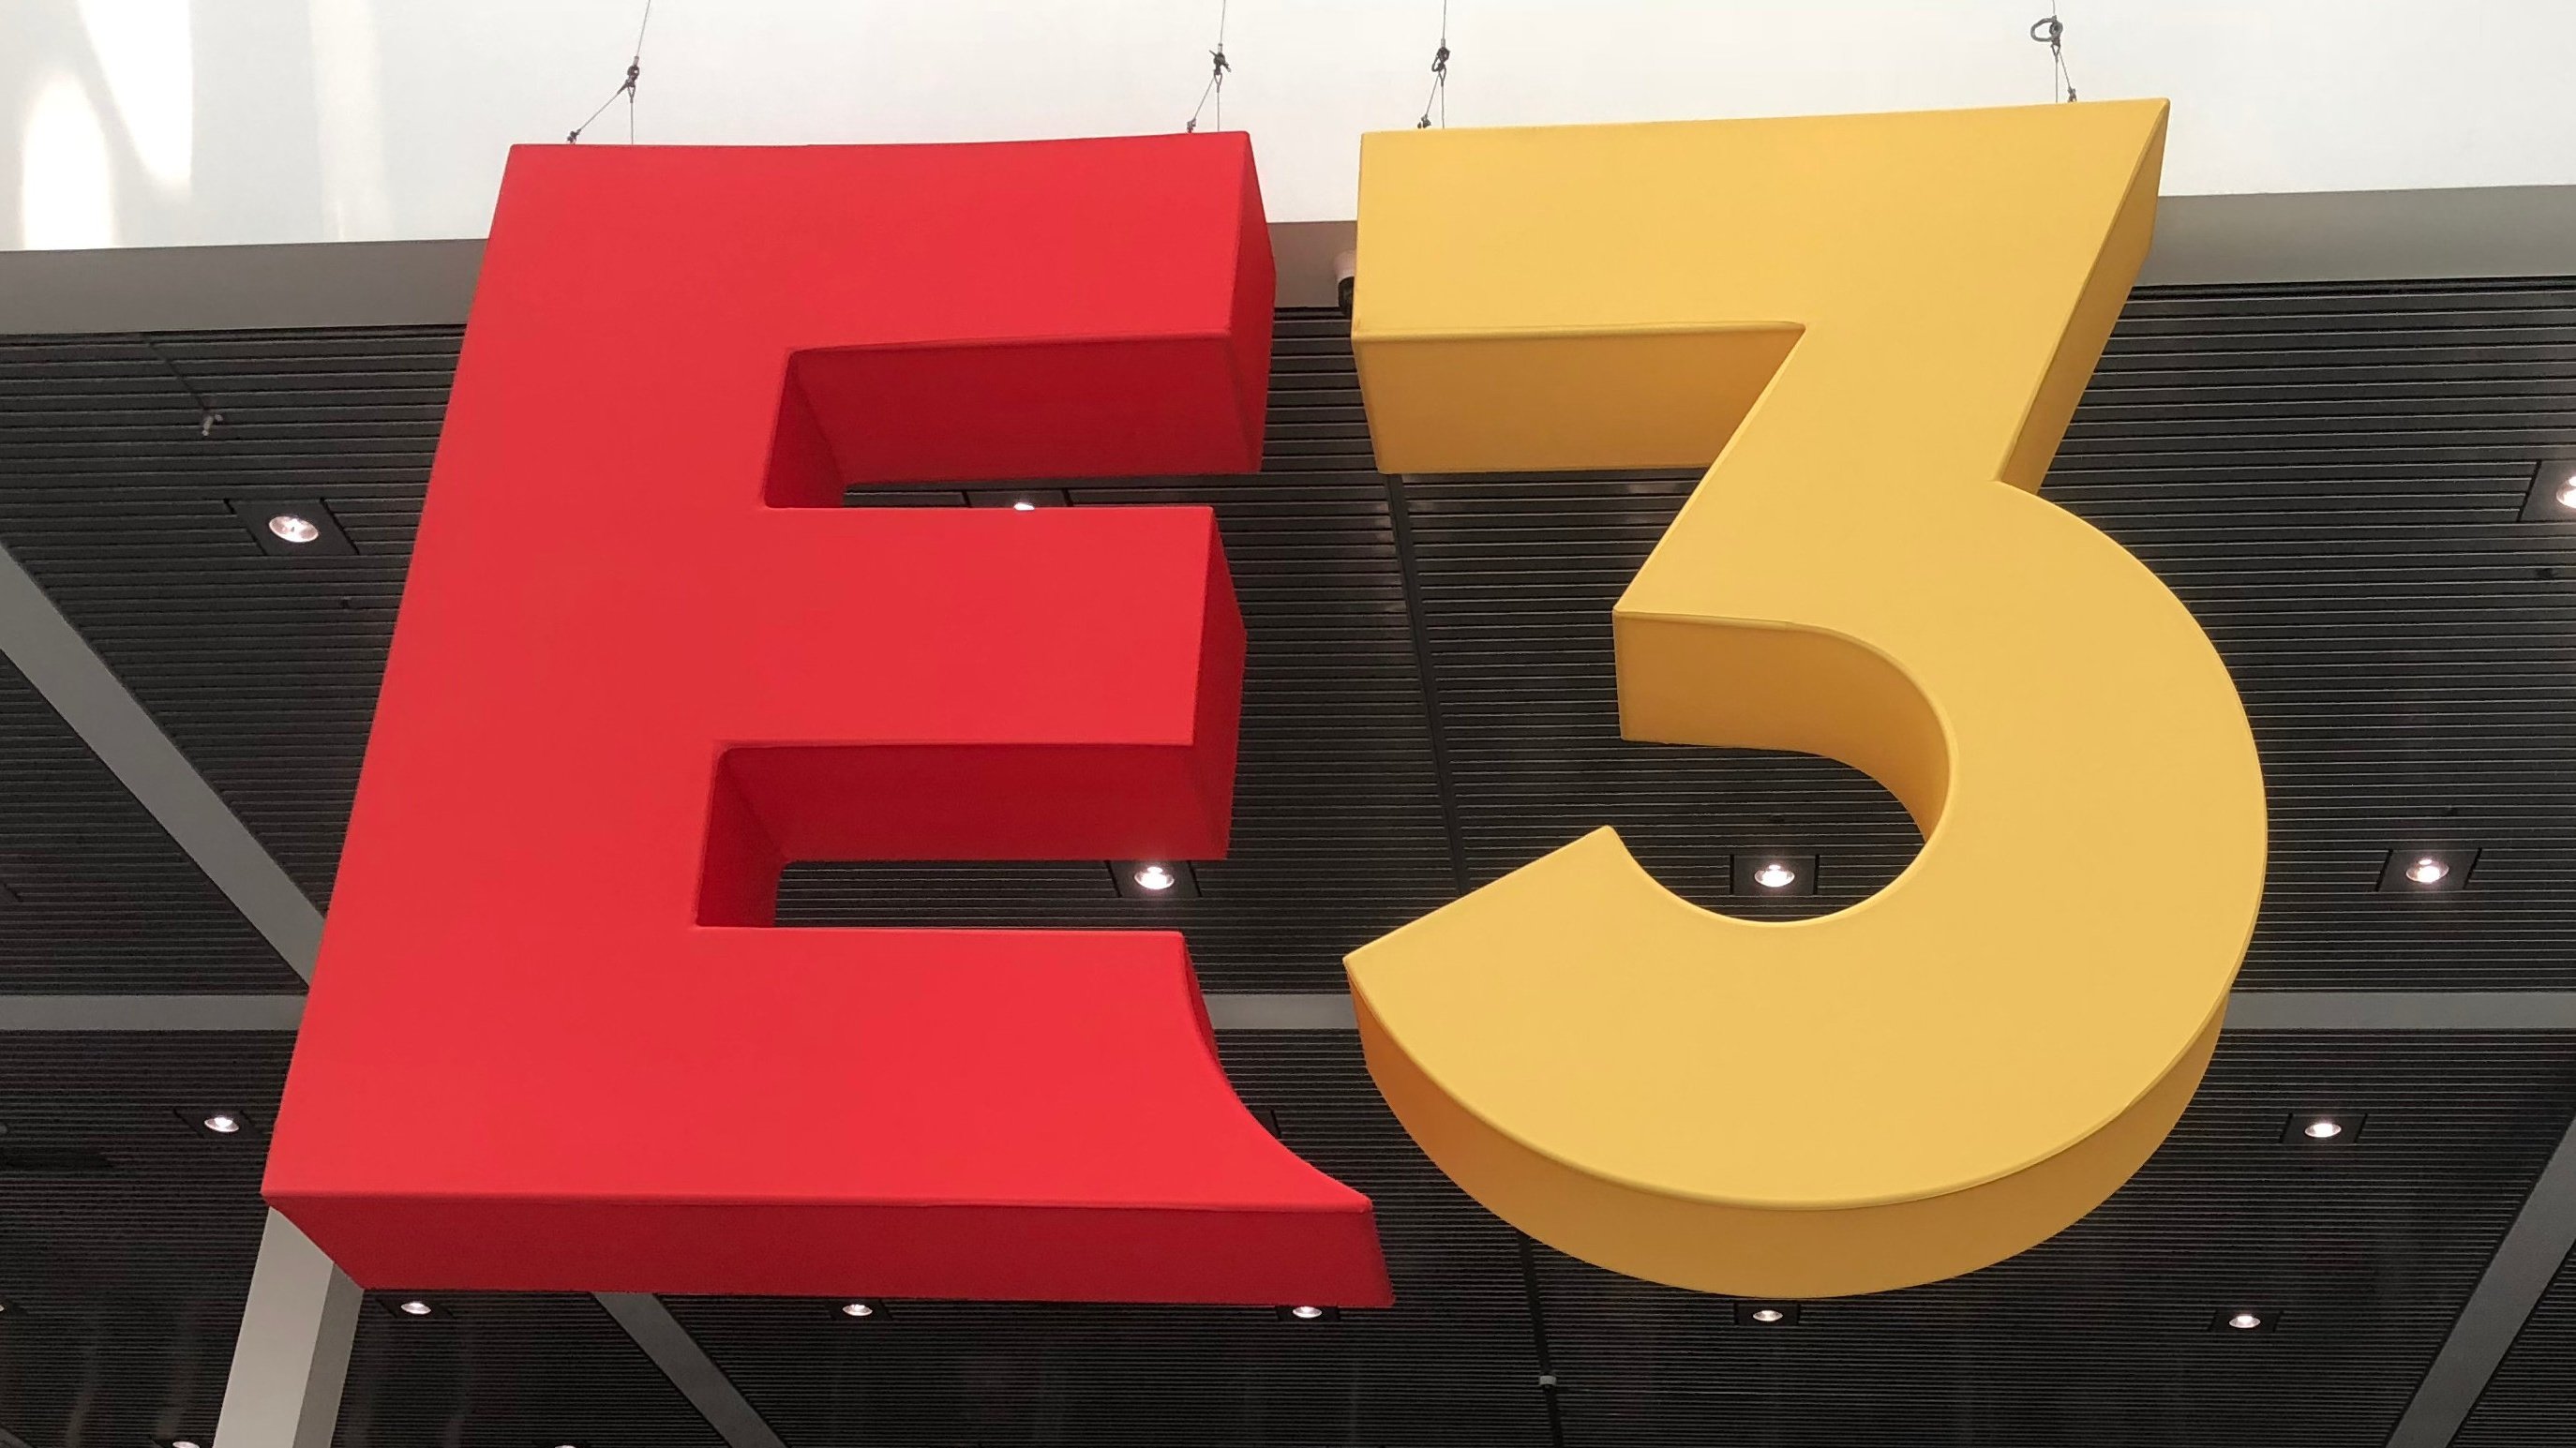 Don't cry for E3 2020, IGN announces the Summer of Gaming event